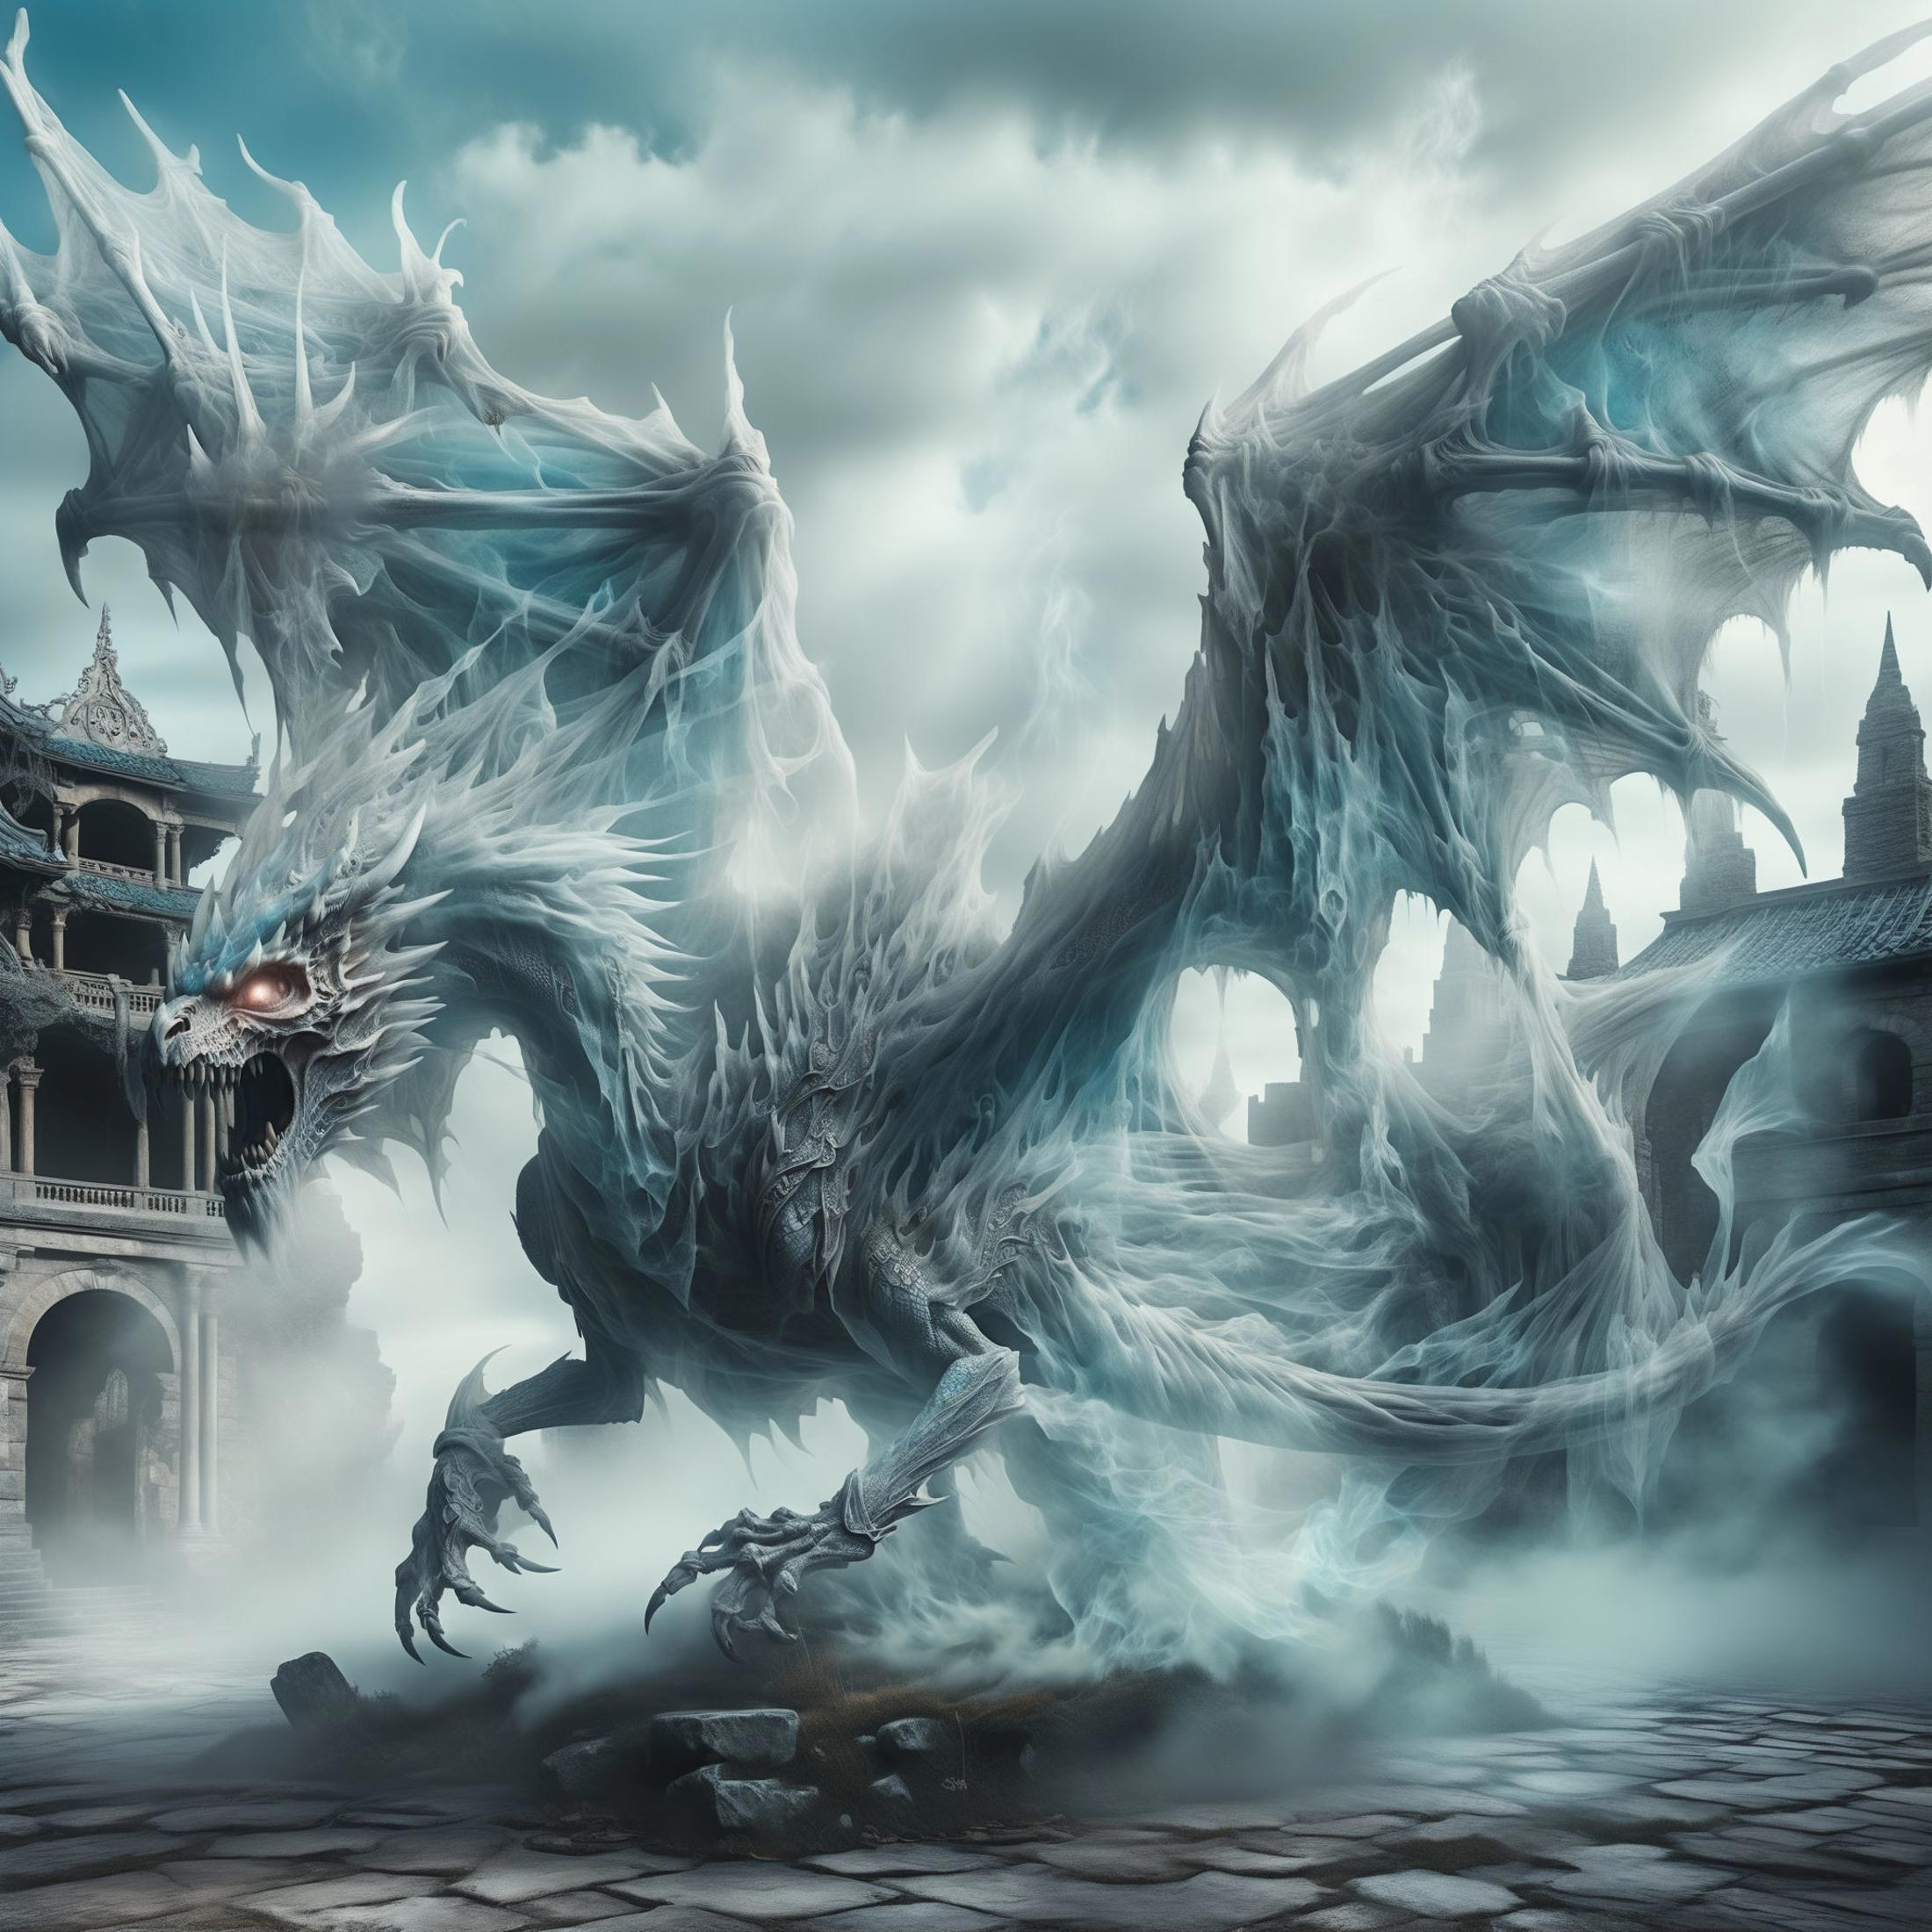 A majestic blue and white dragon with large wings and sharp claws standing in front of a ruined castle or building.